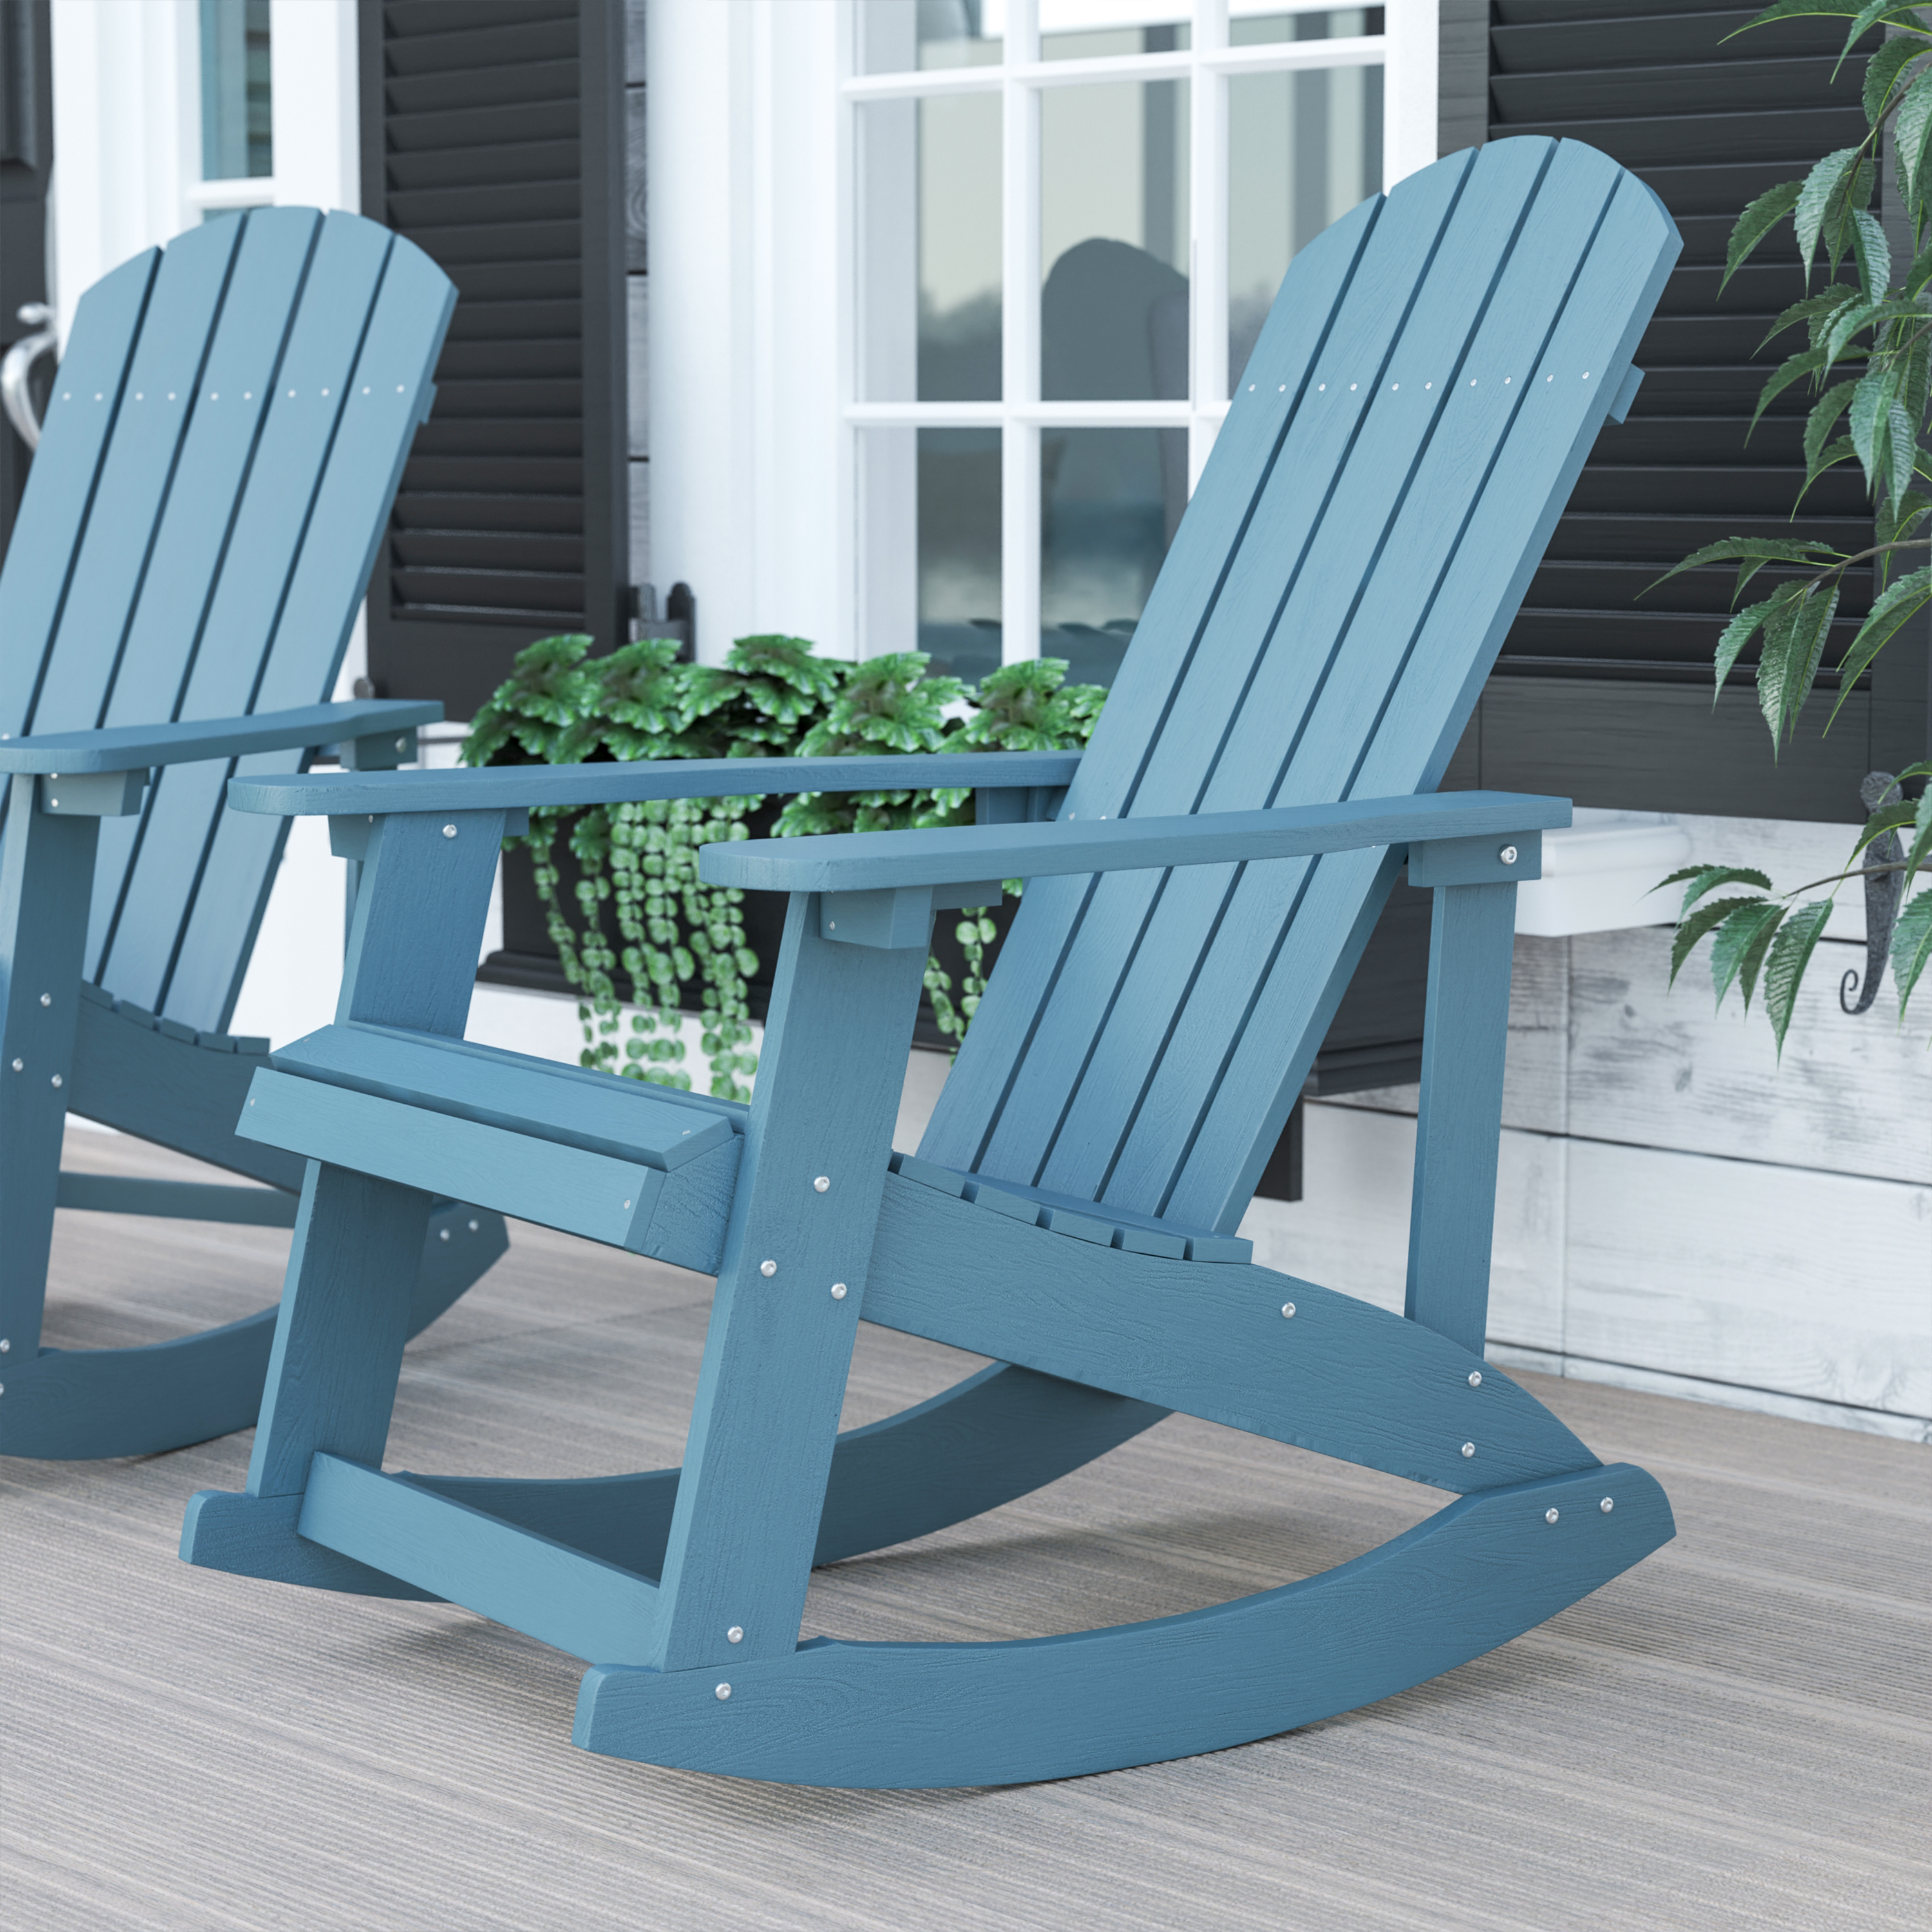 JJC14705 Outdoor Adirondack Chair With Rust Resistant Stainless Steel Hardware Featured Image